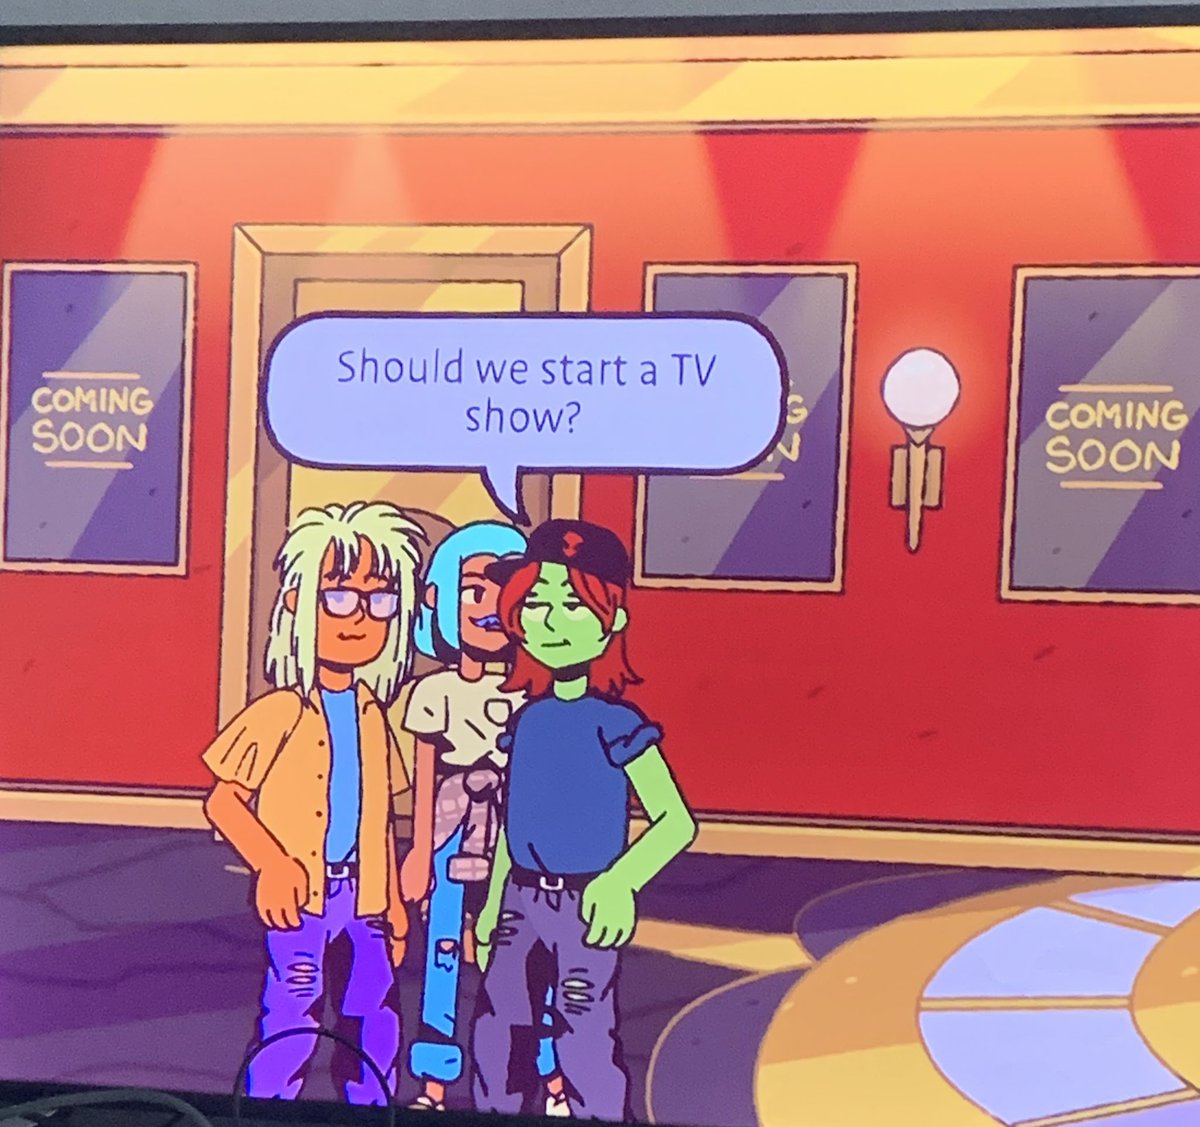 i'm really enjoying my play through so far of the big con!!! love the 90s aesthetics, rad ghost, sapphic couples, frequent gender neutral language, casual representation, and the very fun storyline!!! also chuckled at the wayne's world cameos
here's a couple random screen grabs